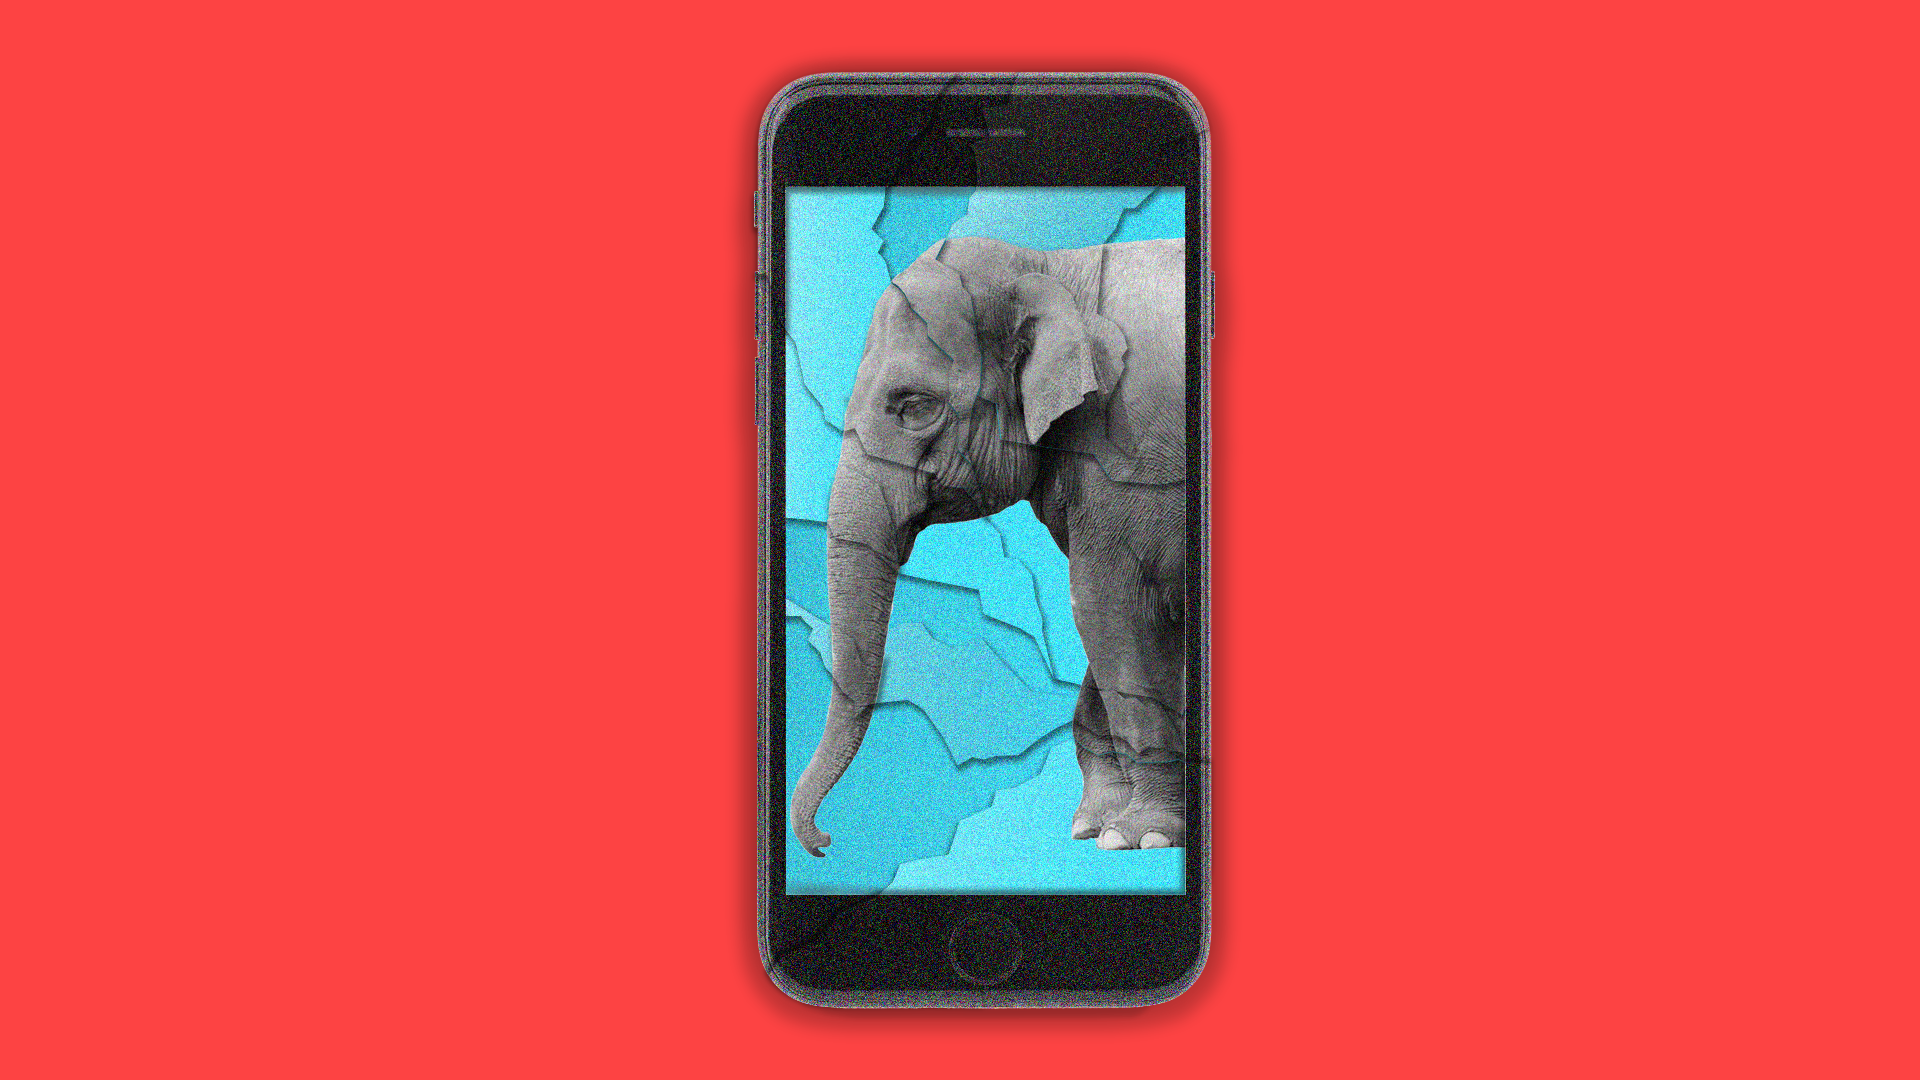 Smartphone with an elephant on the screen